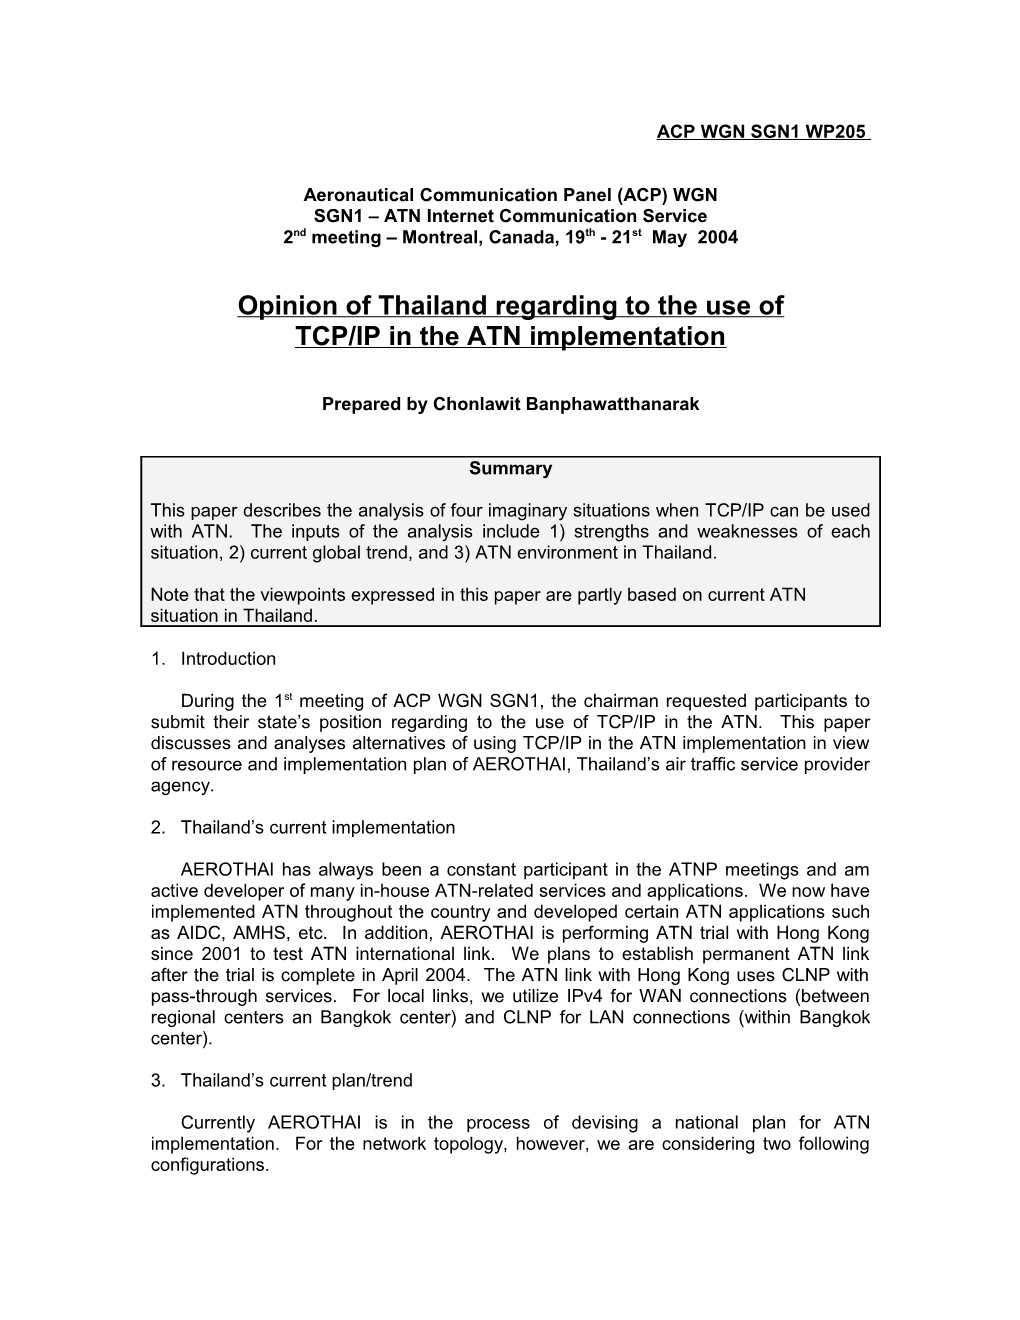 Opinion of Thailand Regarding to the Use of TCP/IP in the ATN Implementation